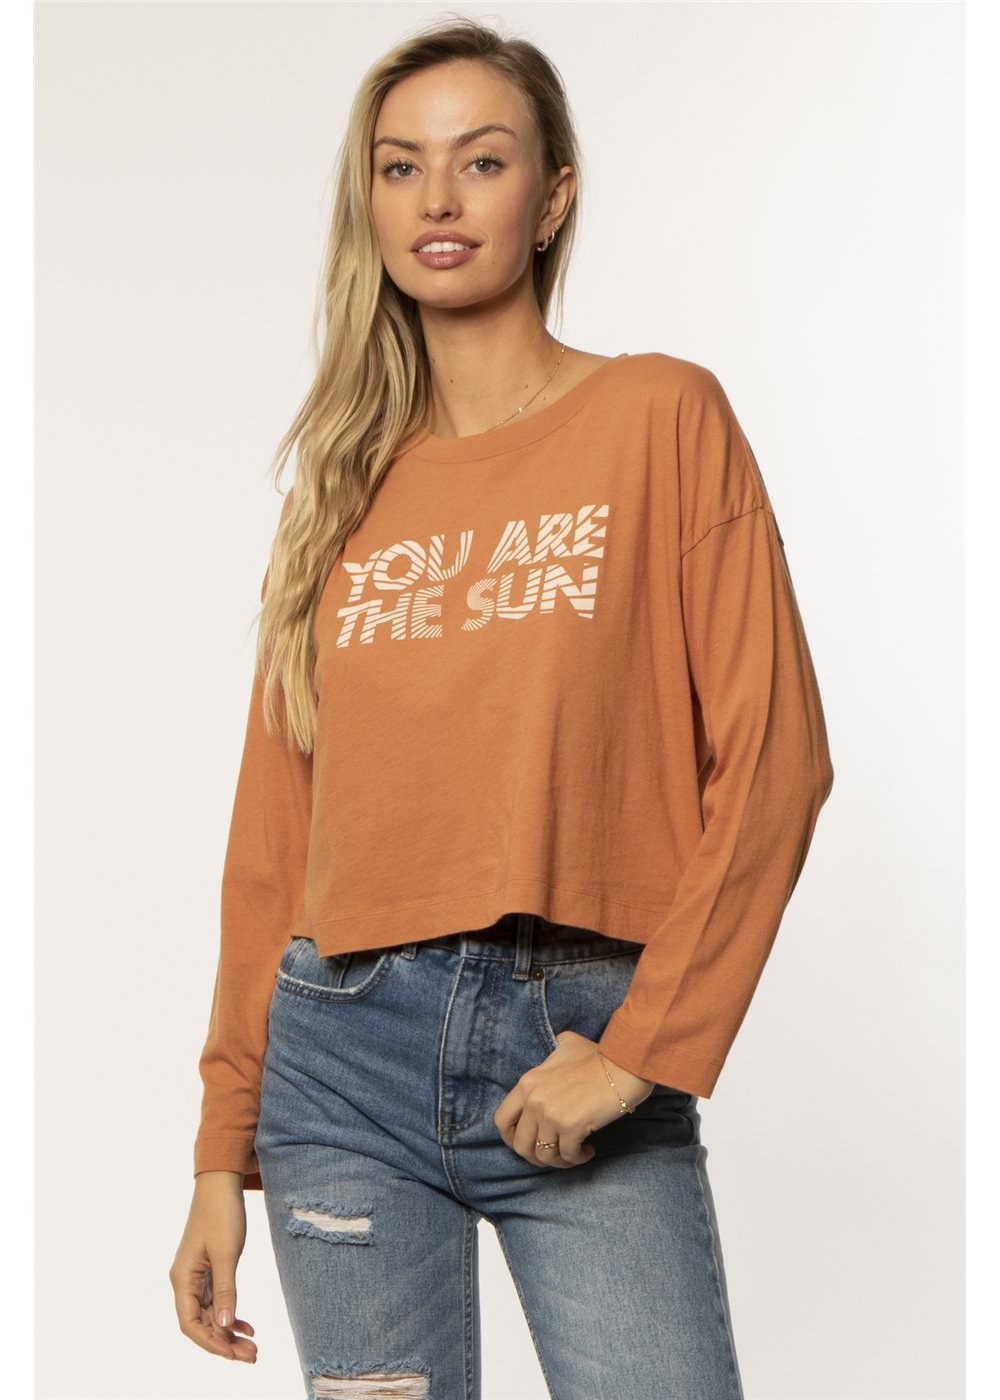 YOU ARE THE SUN LS KNIT TEE